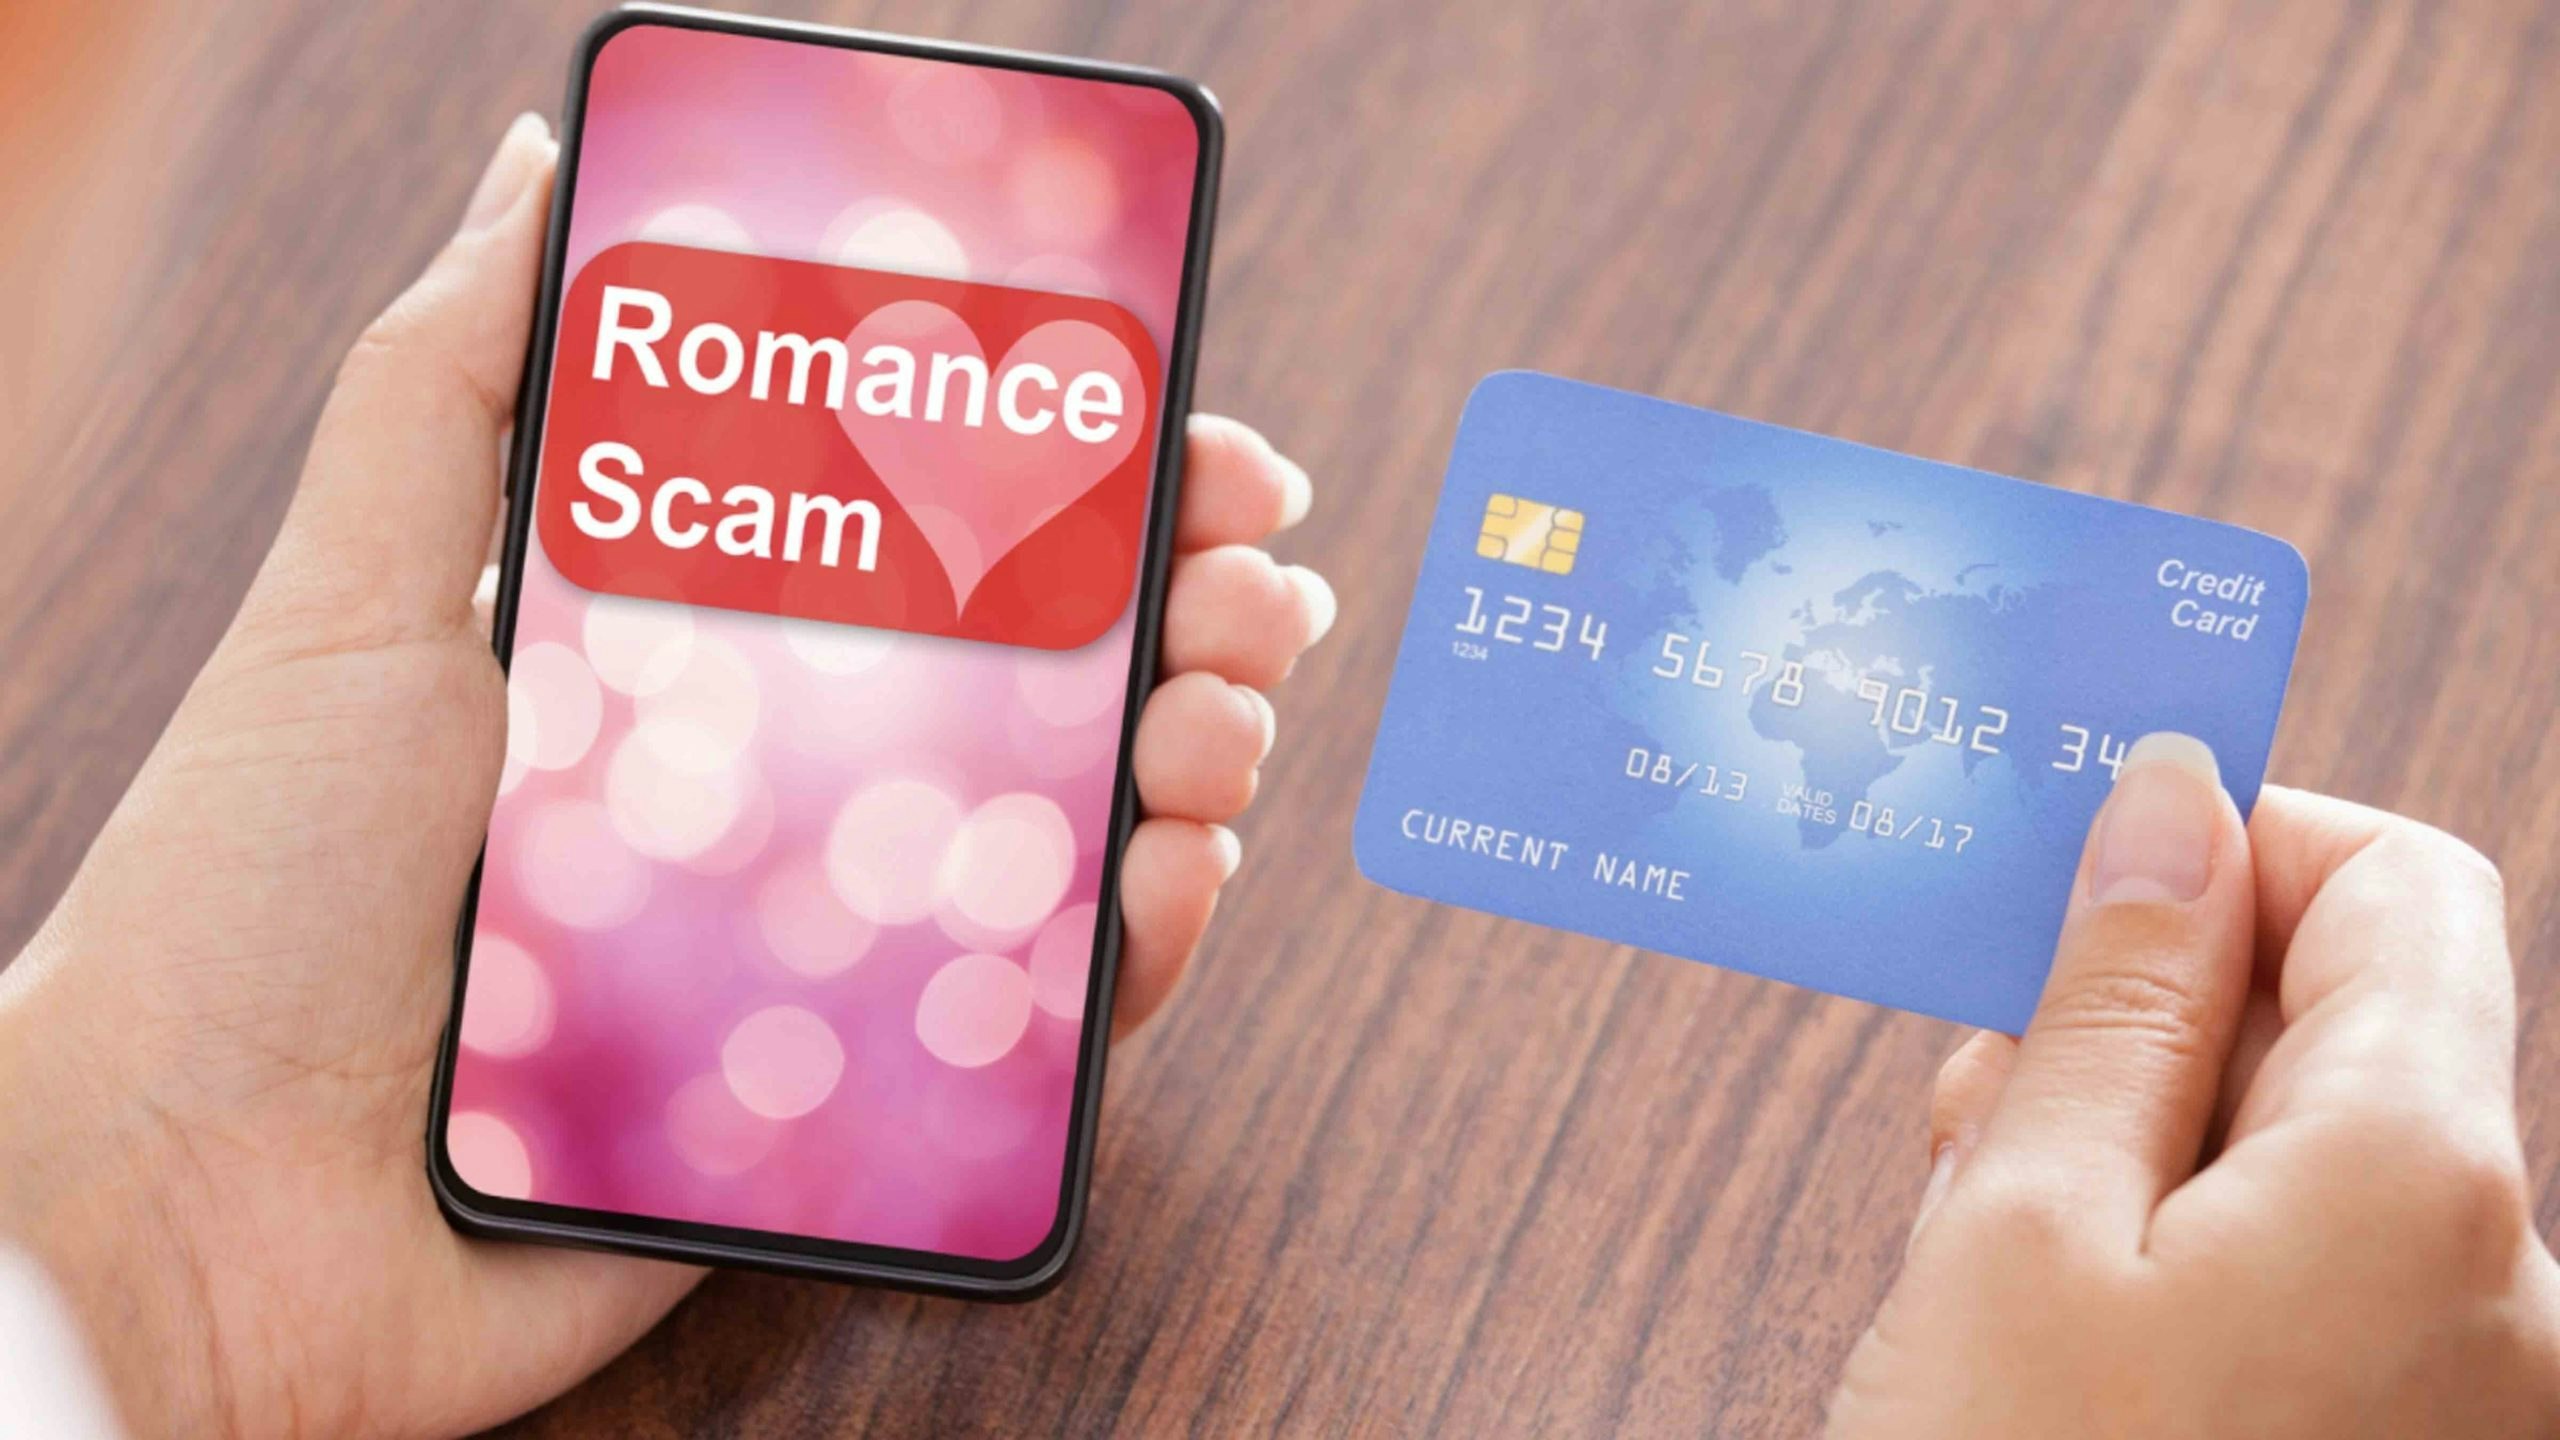 Online romance scam 3 3 22 scaled